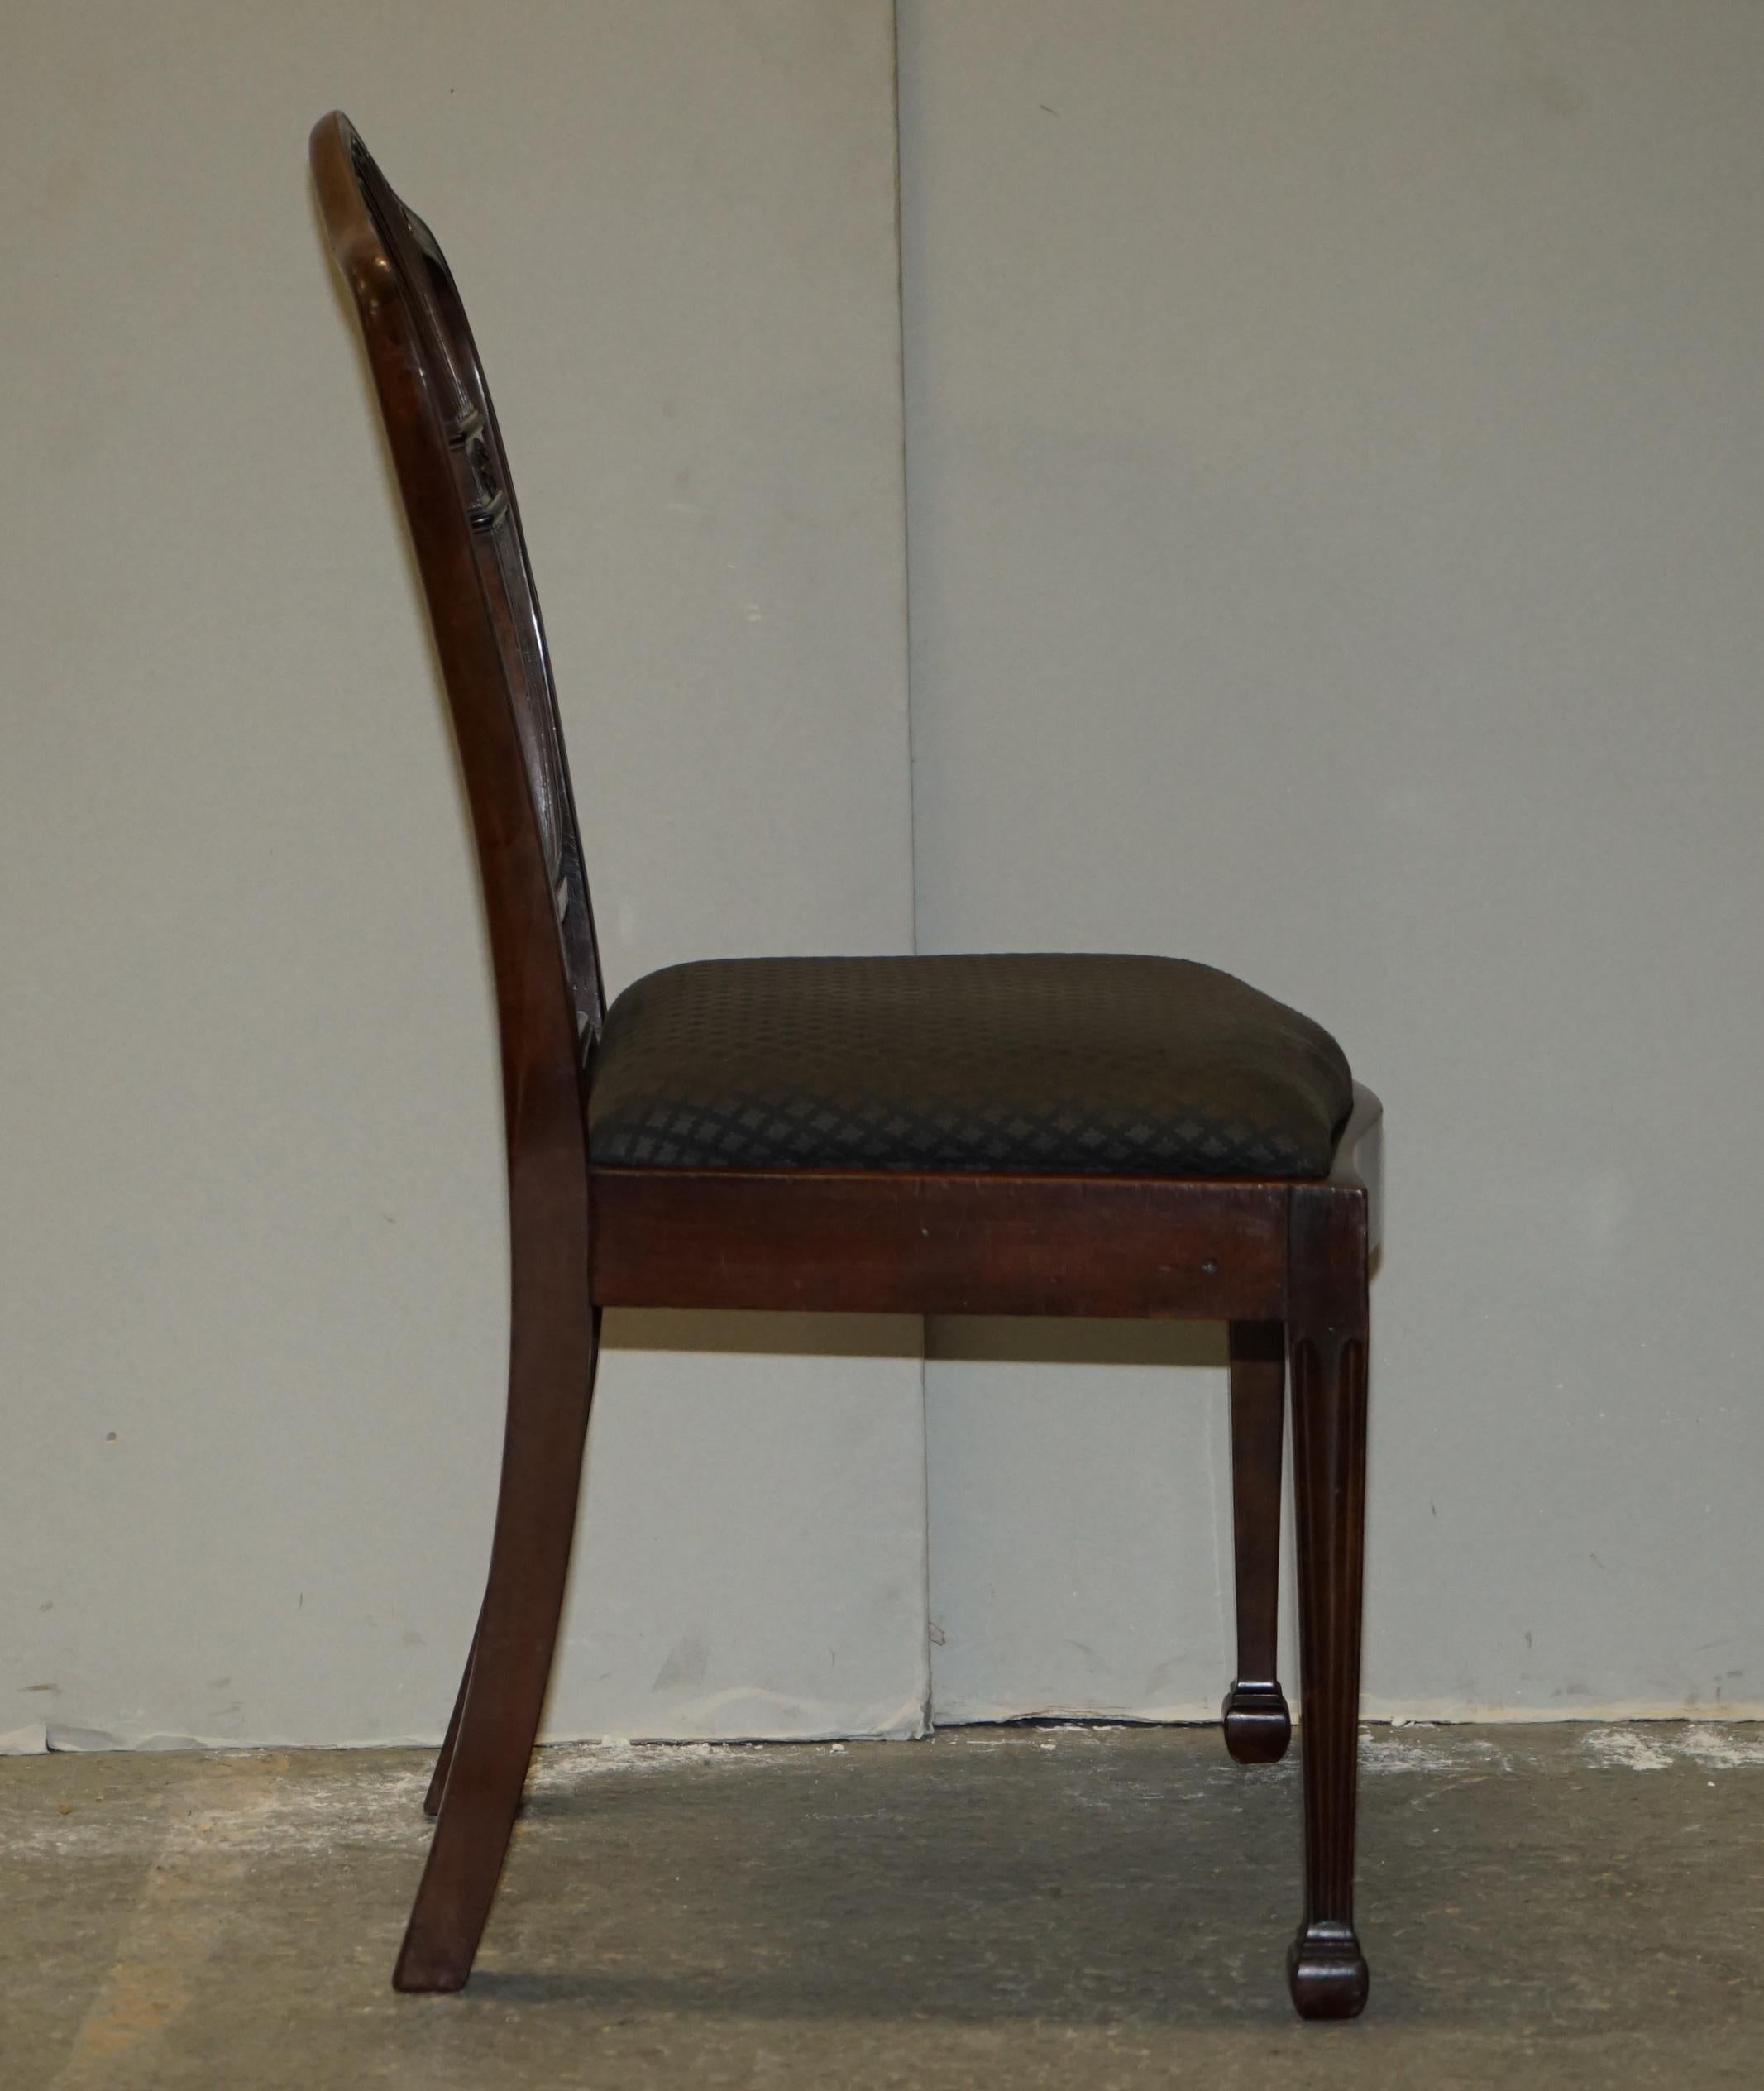 8 ANTIQUE GEORGE HEPPLEWHITE STYLE DINING CHAIRS FROM LADY DIANA'S SPENCER HOUSE im Angebot 12